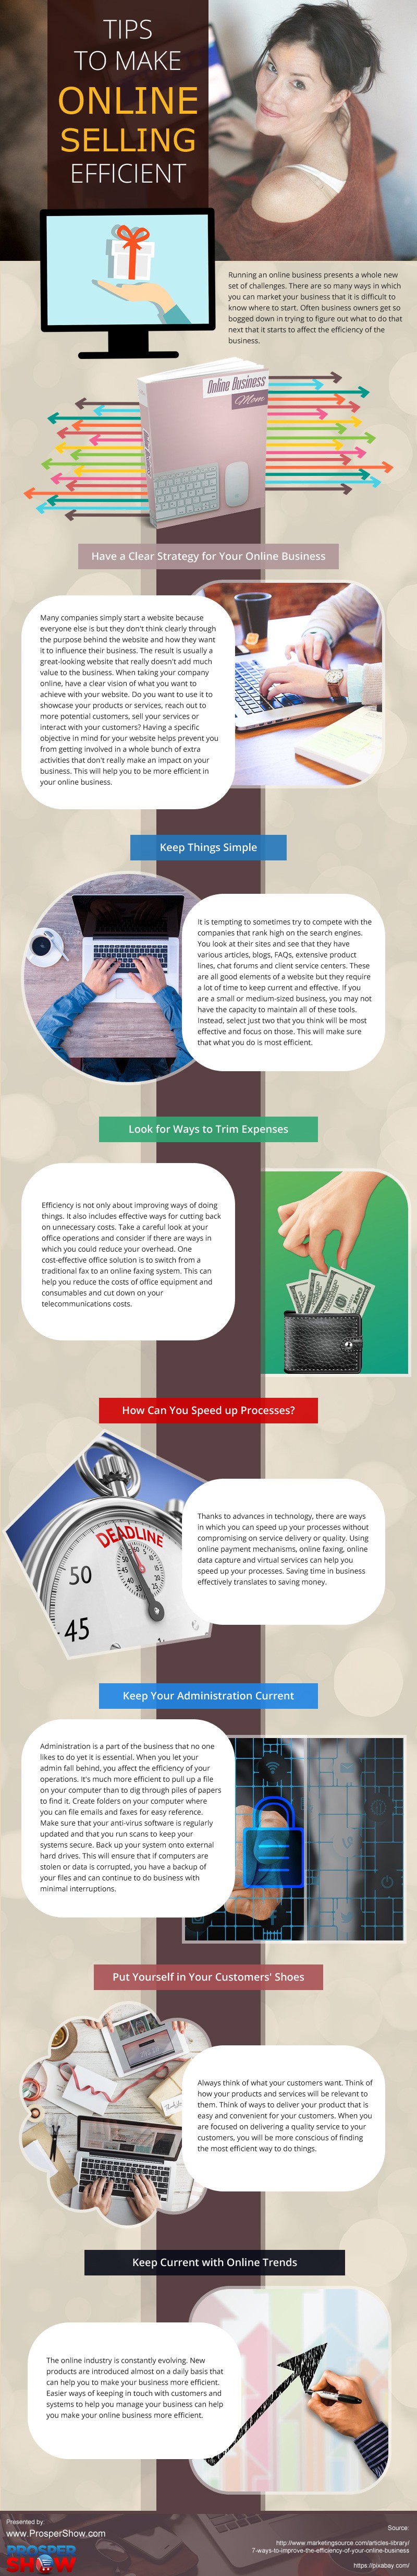 Tips-to-Make-Online-Selling-Efficient Infographic